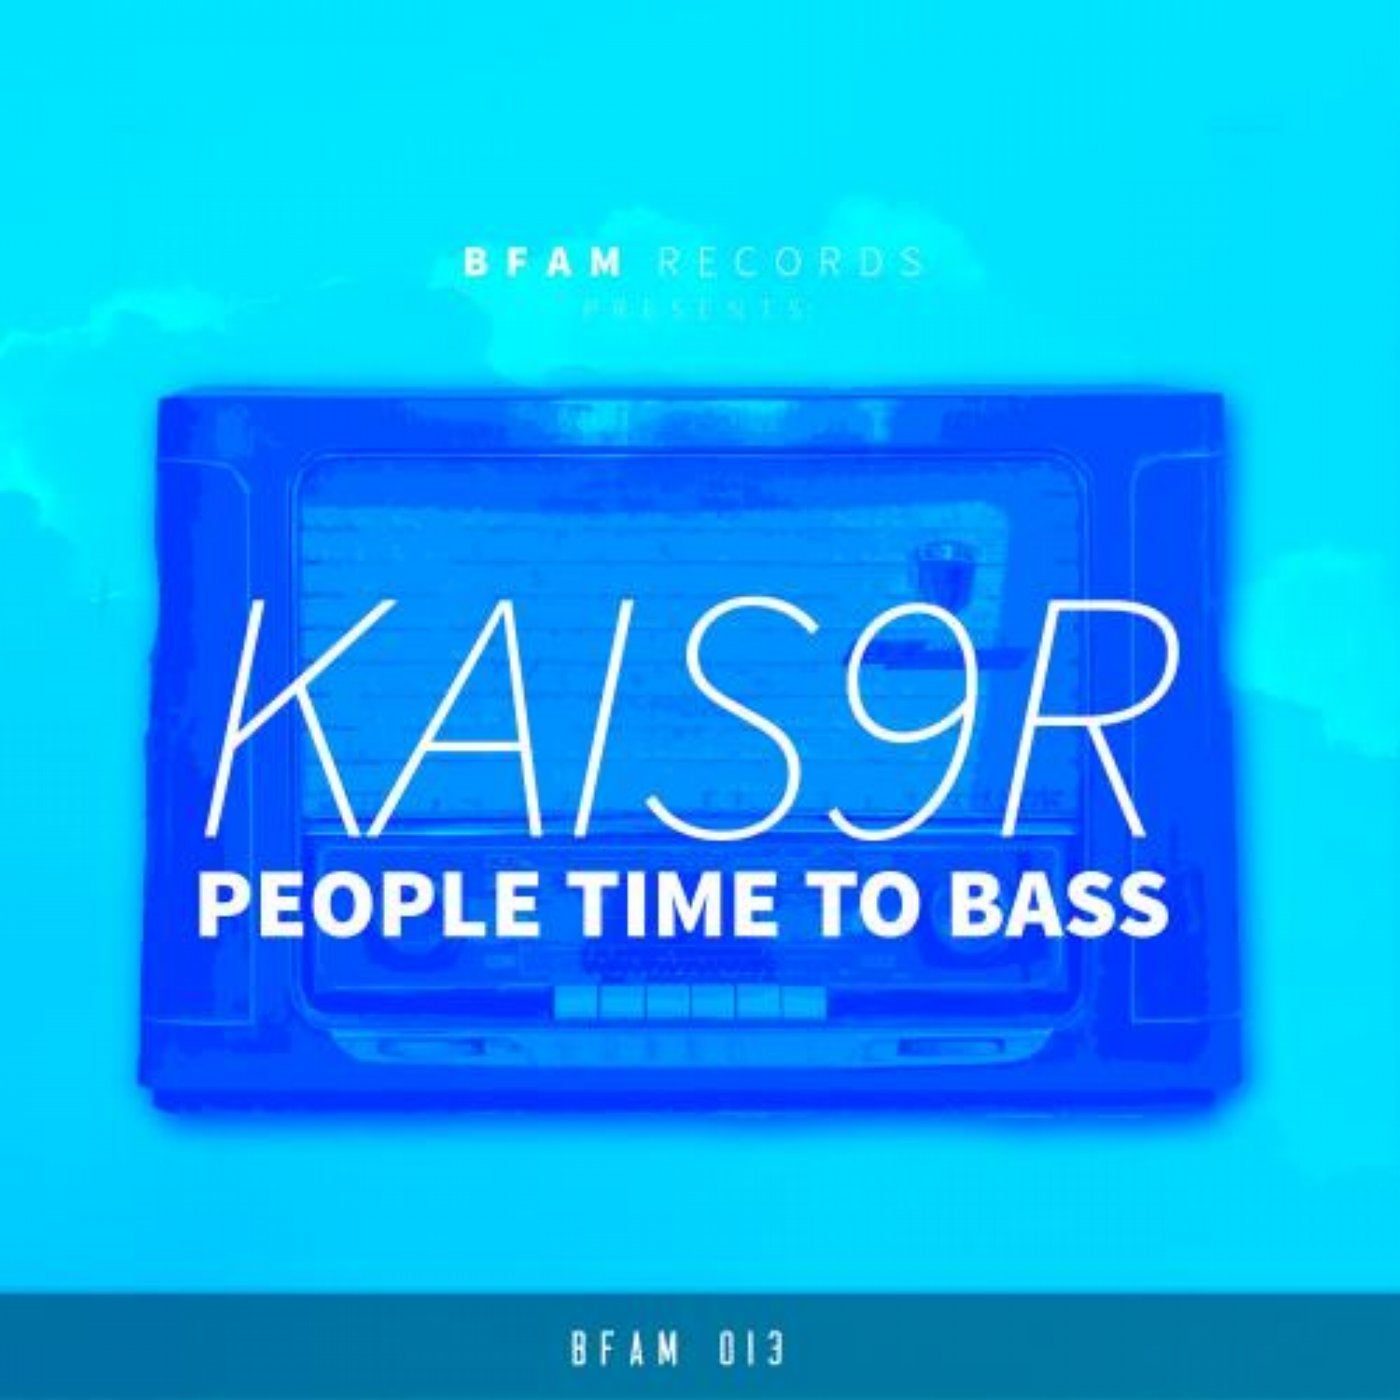 People Time To Bass